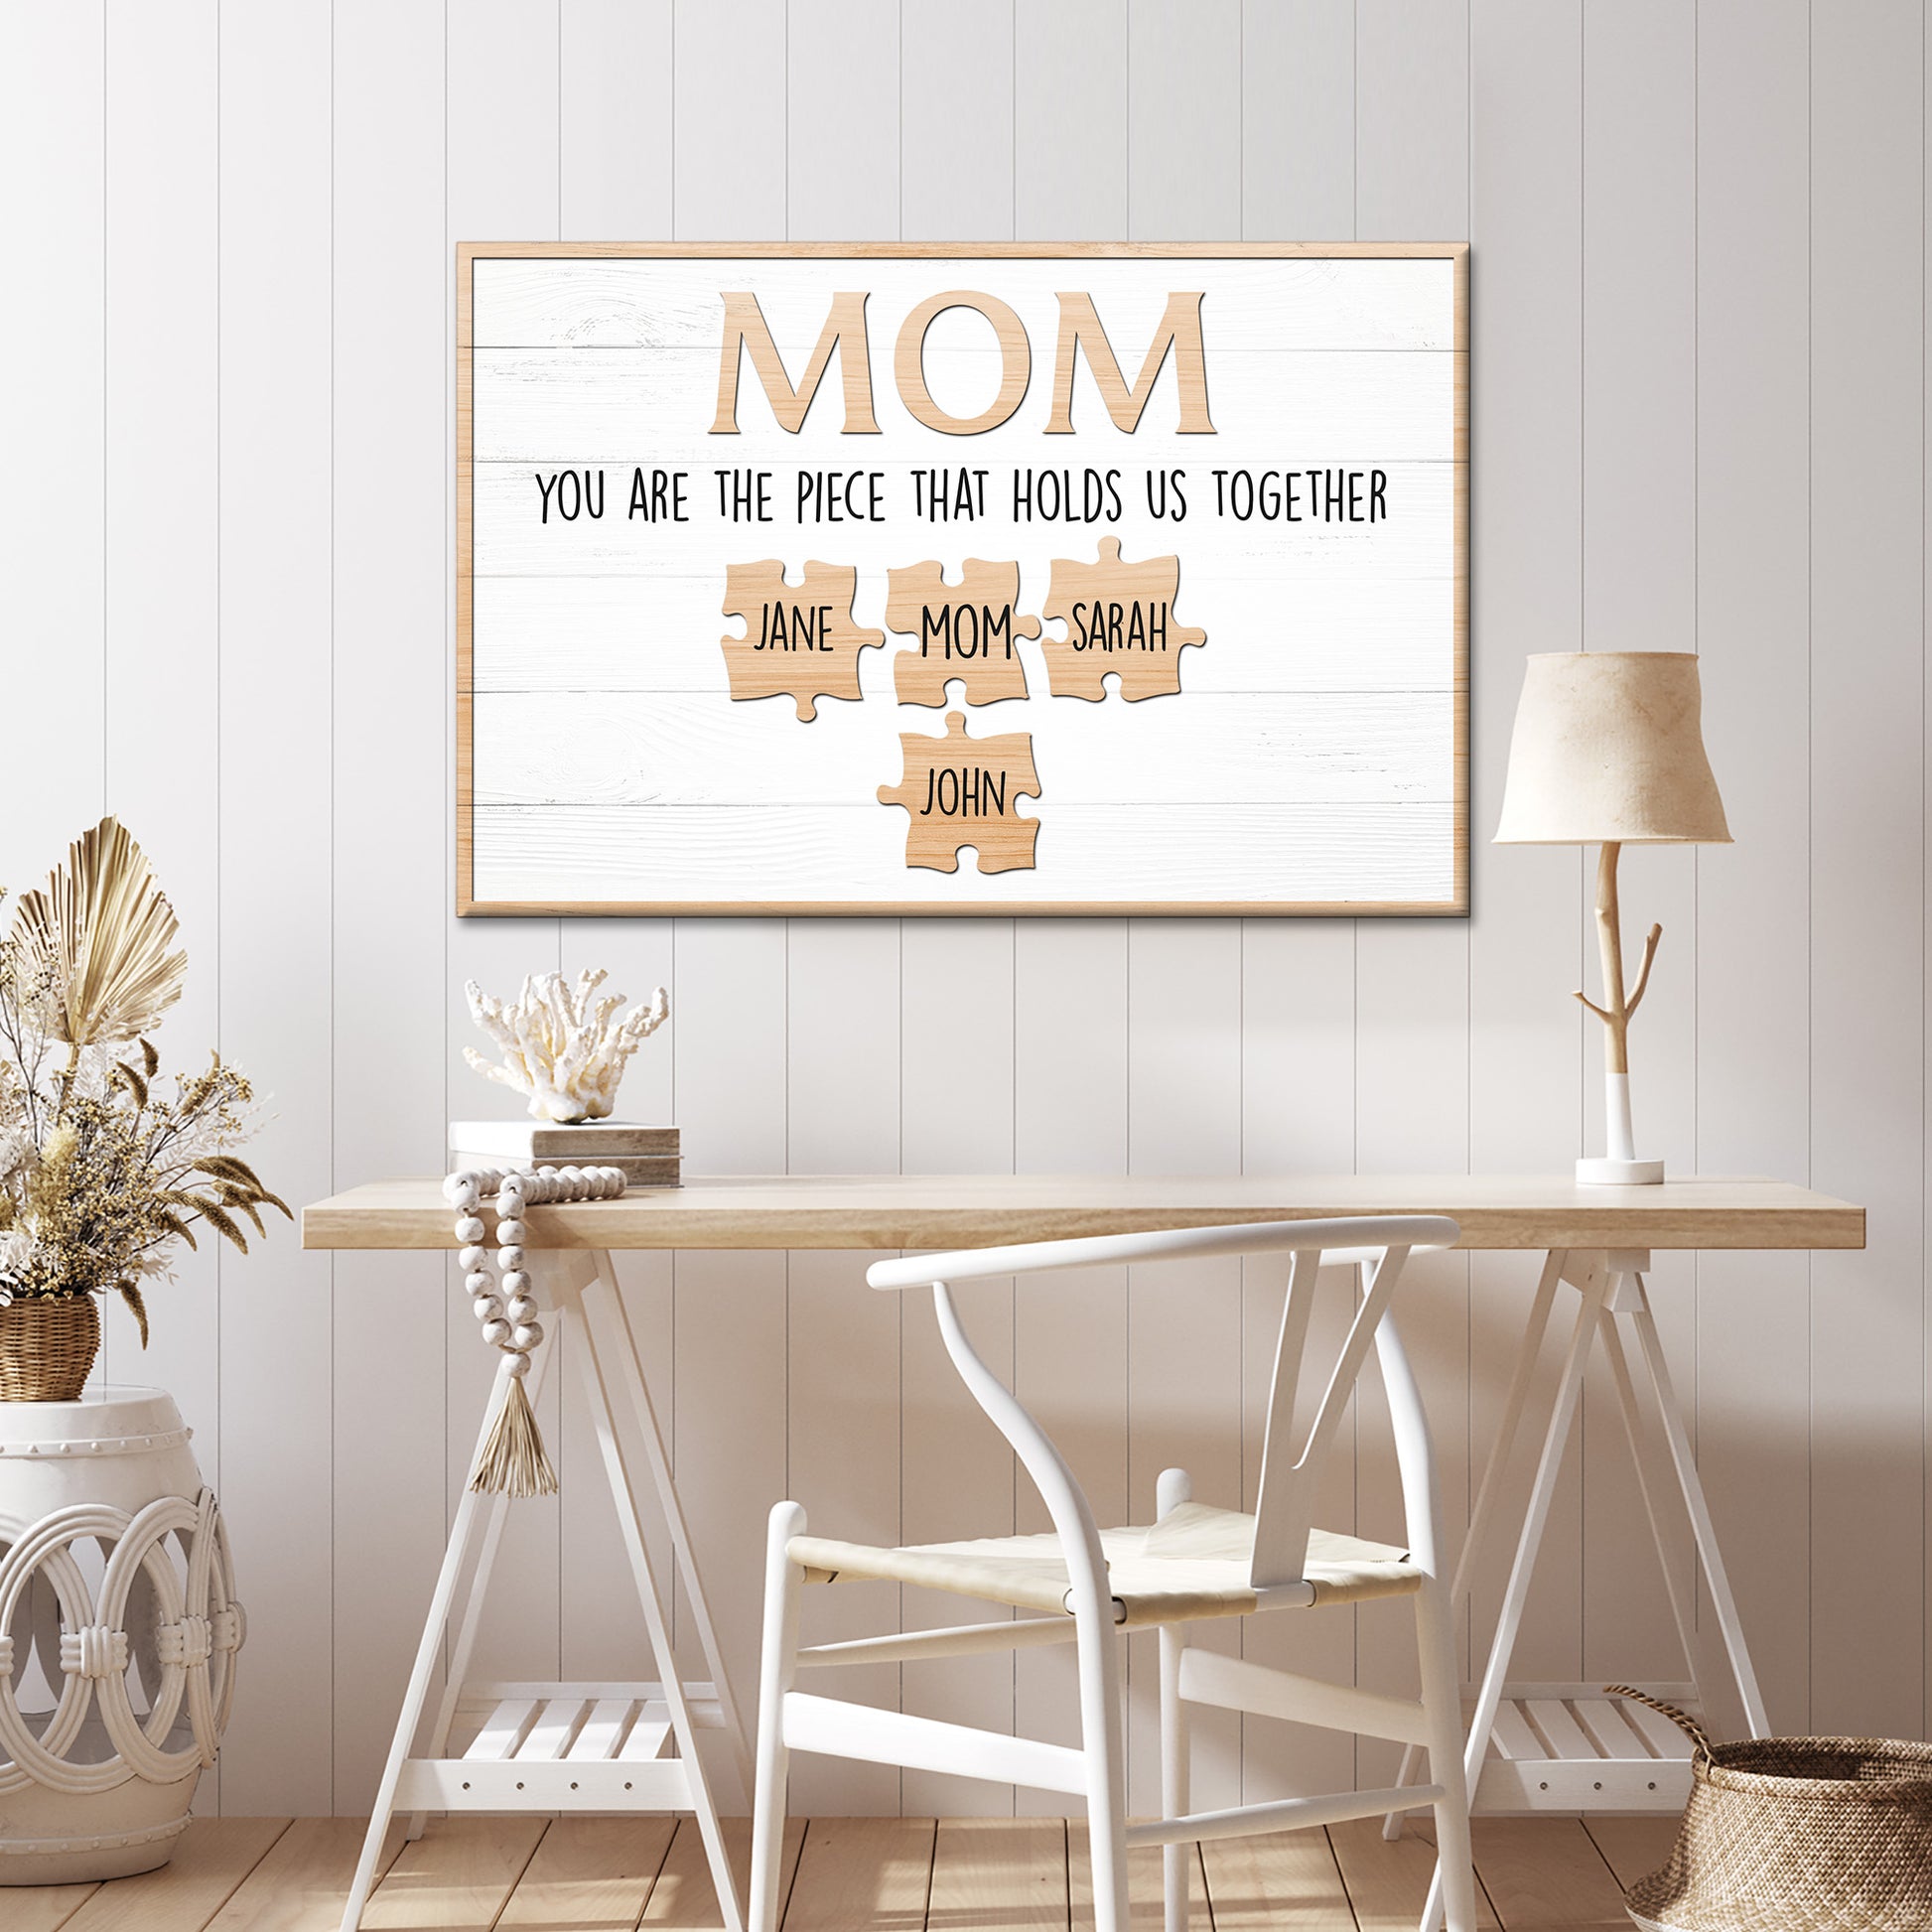 Mom, The Piece That Holds Us Sign Style 2 - Image by Tailored Canvases